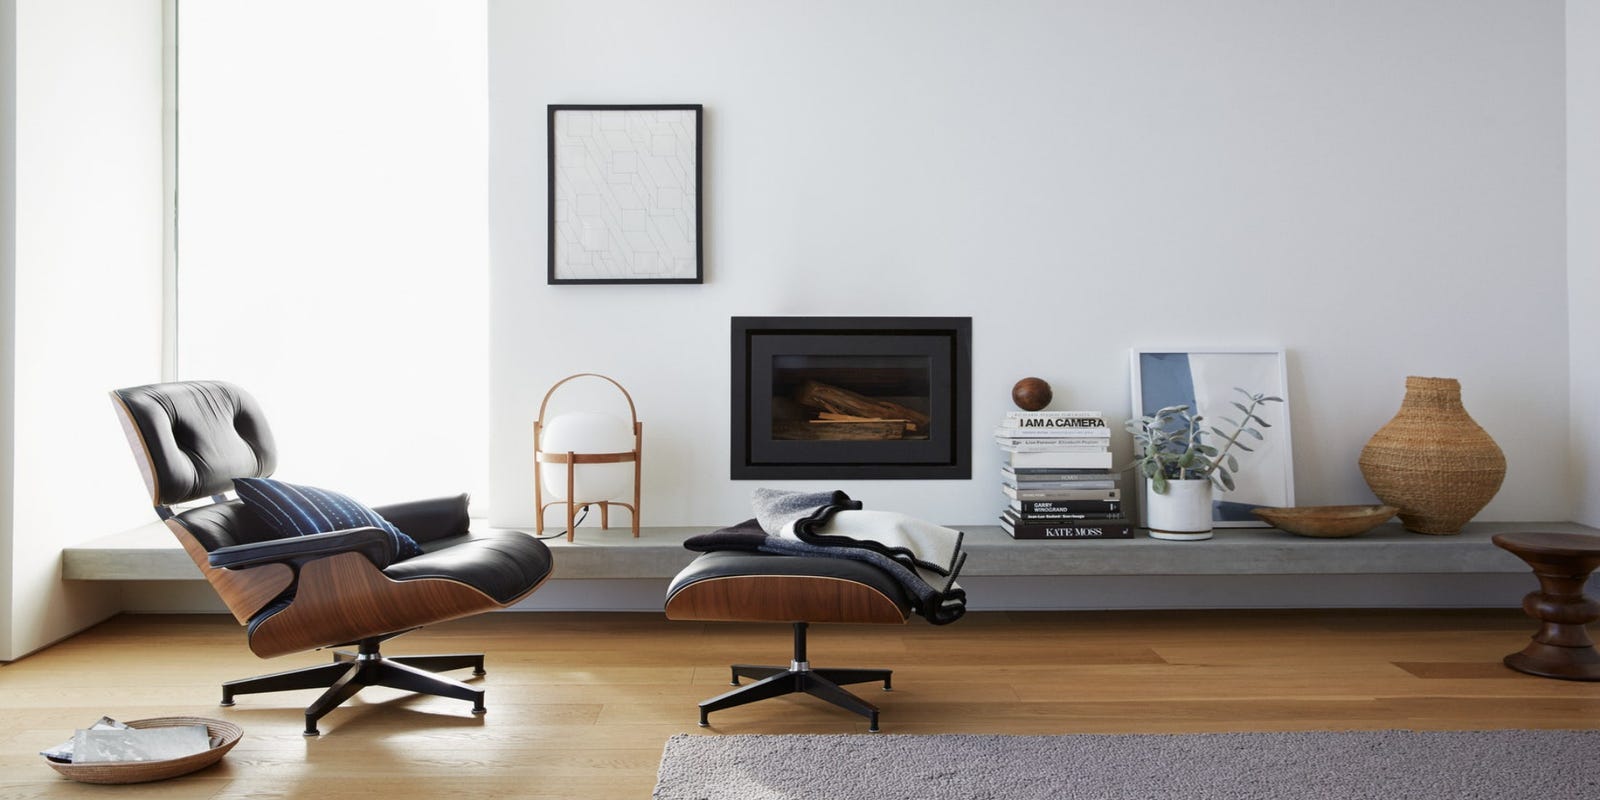 Suri nogmaals ik klaag How to find an affordable Eames chair replica